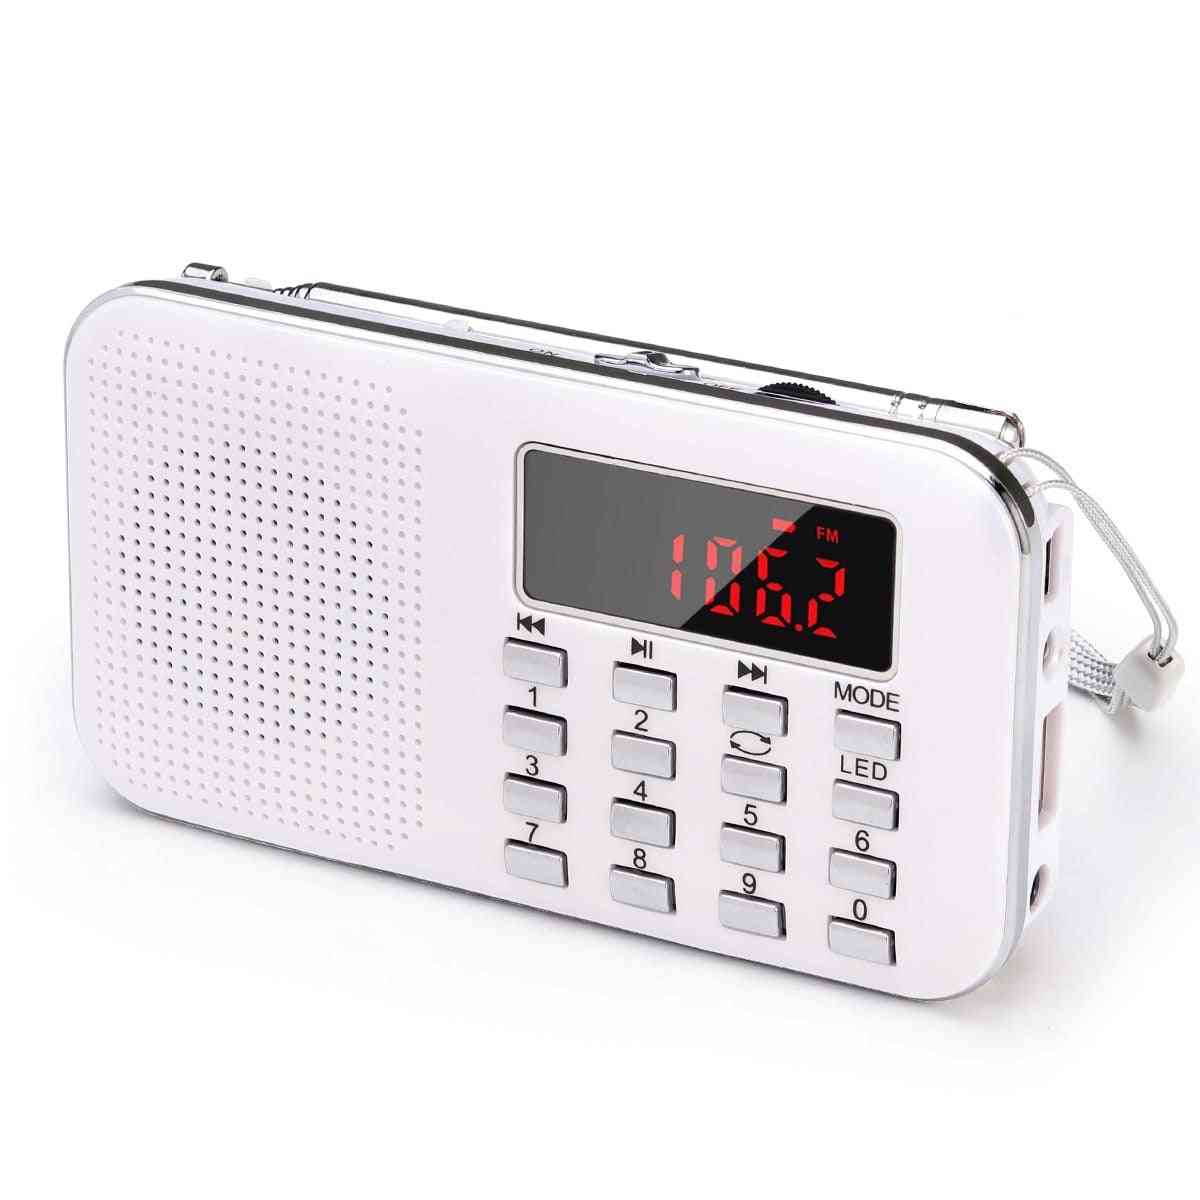 Portable Fm Radio, Rechargeable Receiver With Tf Card